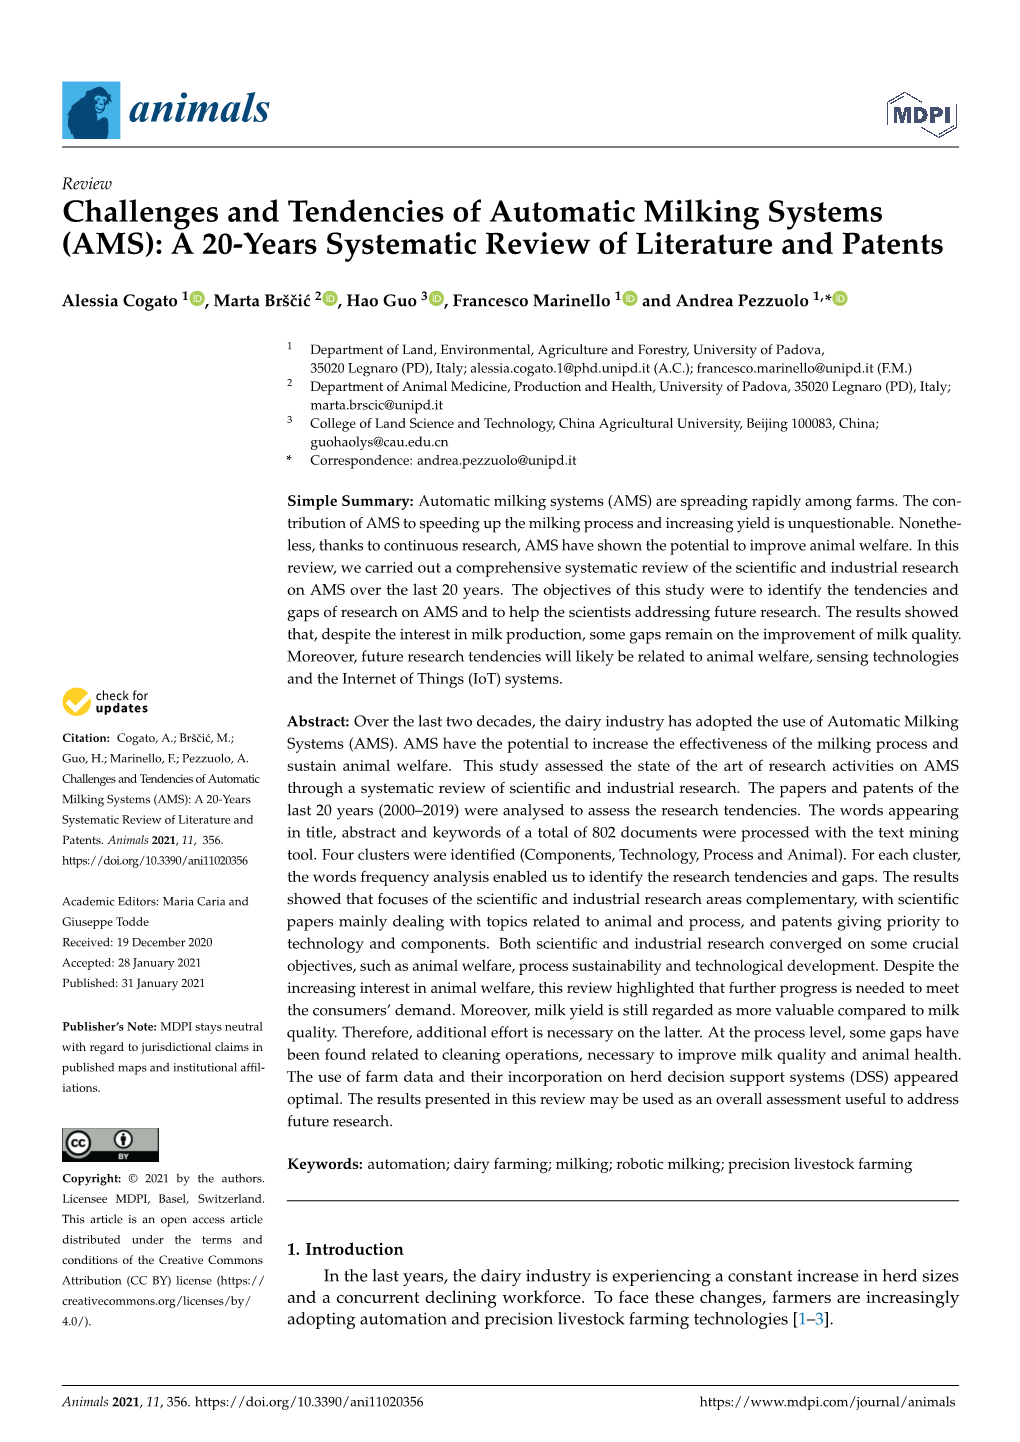 Challenges and Tendencies of Automatic Milking Systems (AMS): a 20-Years Systematic Review of Literature and Patents